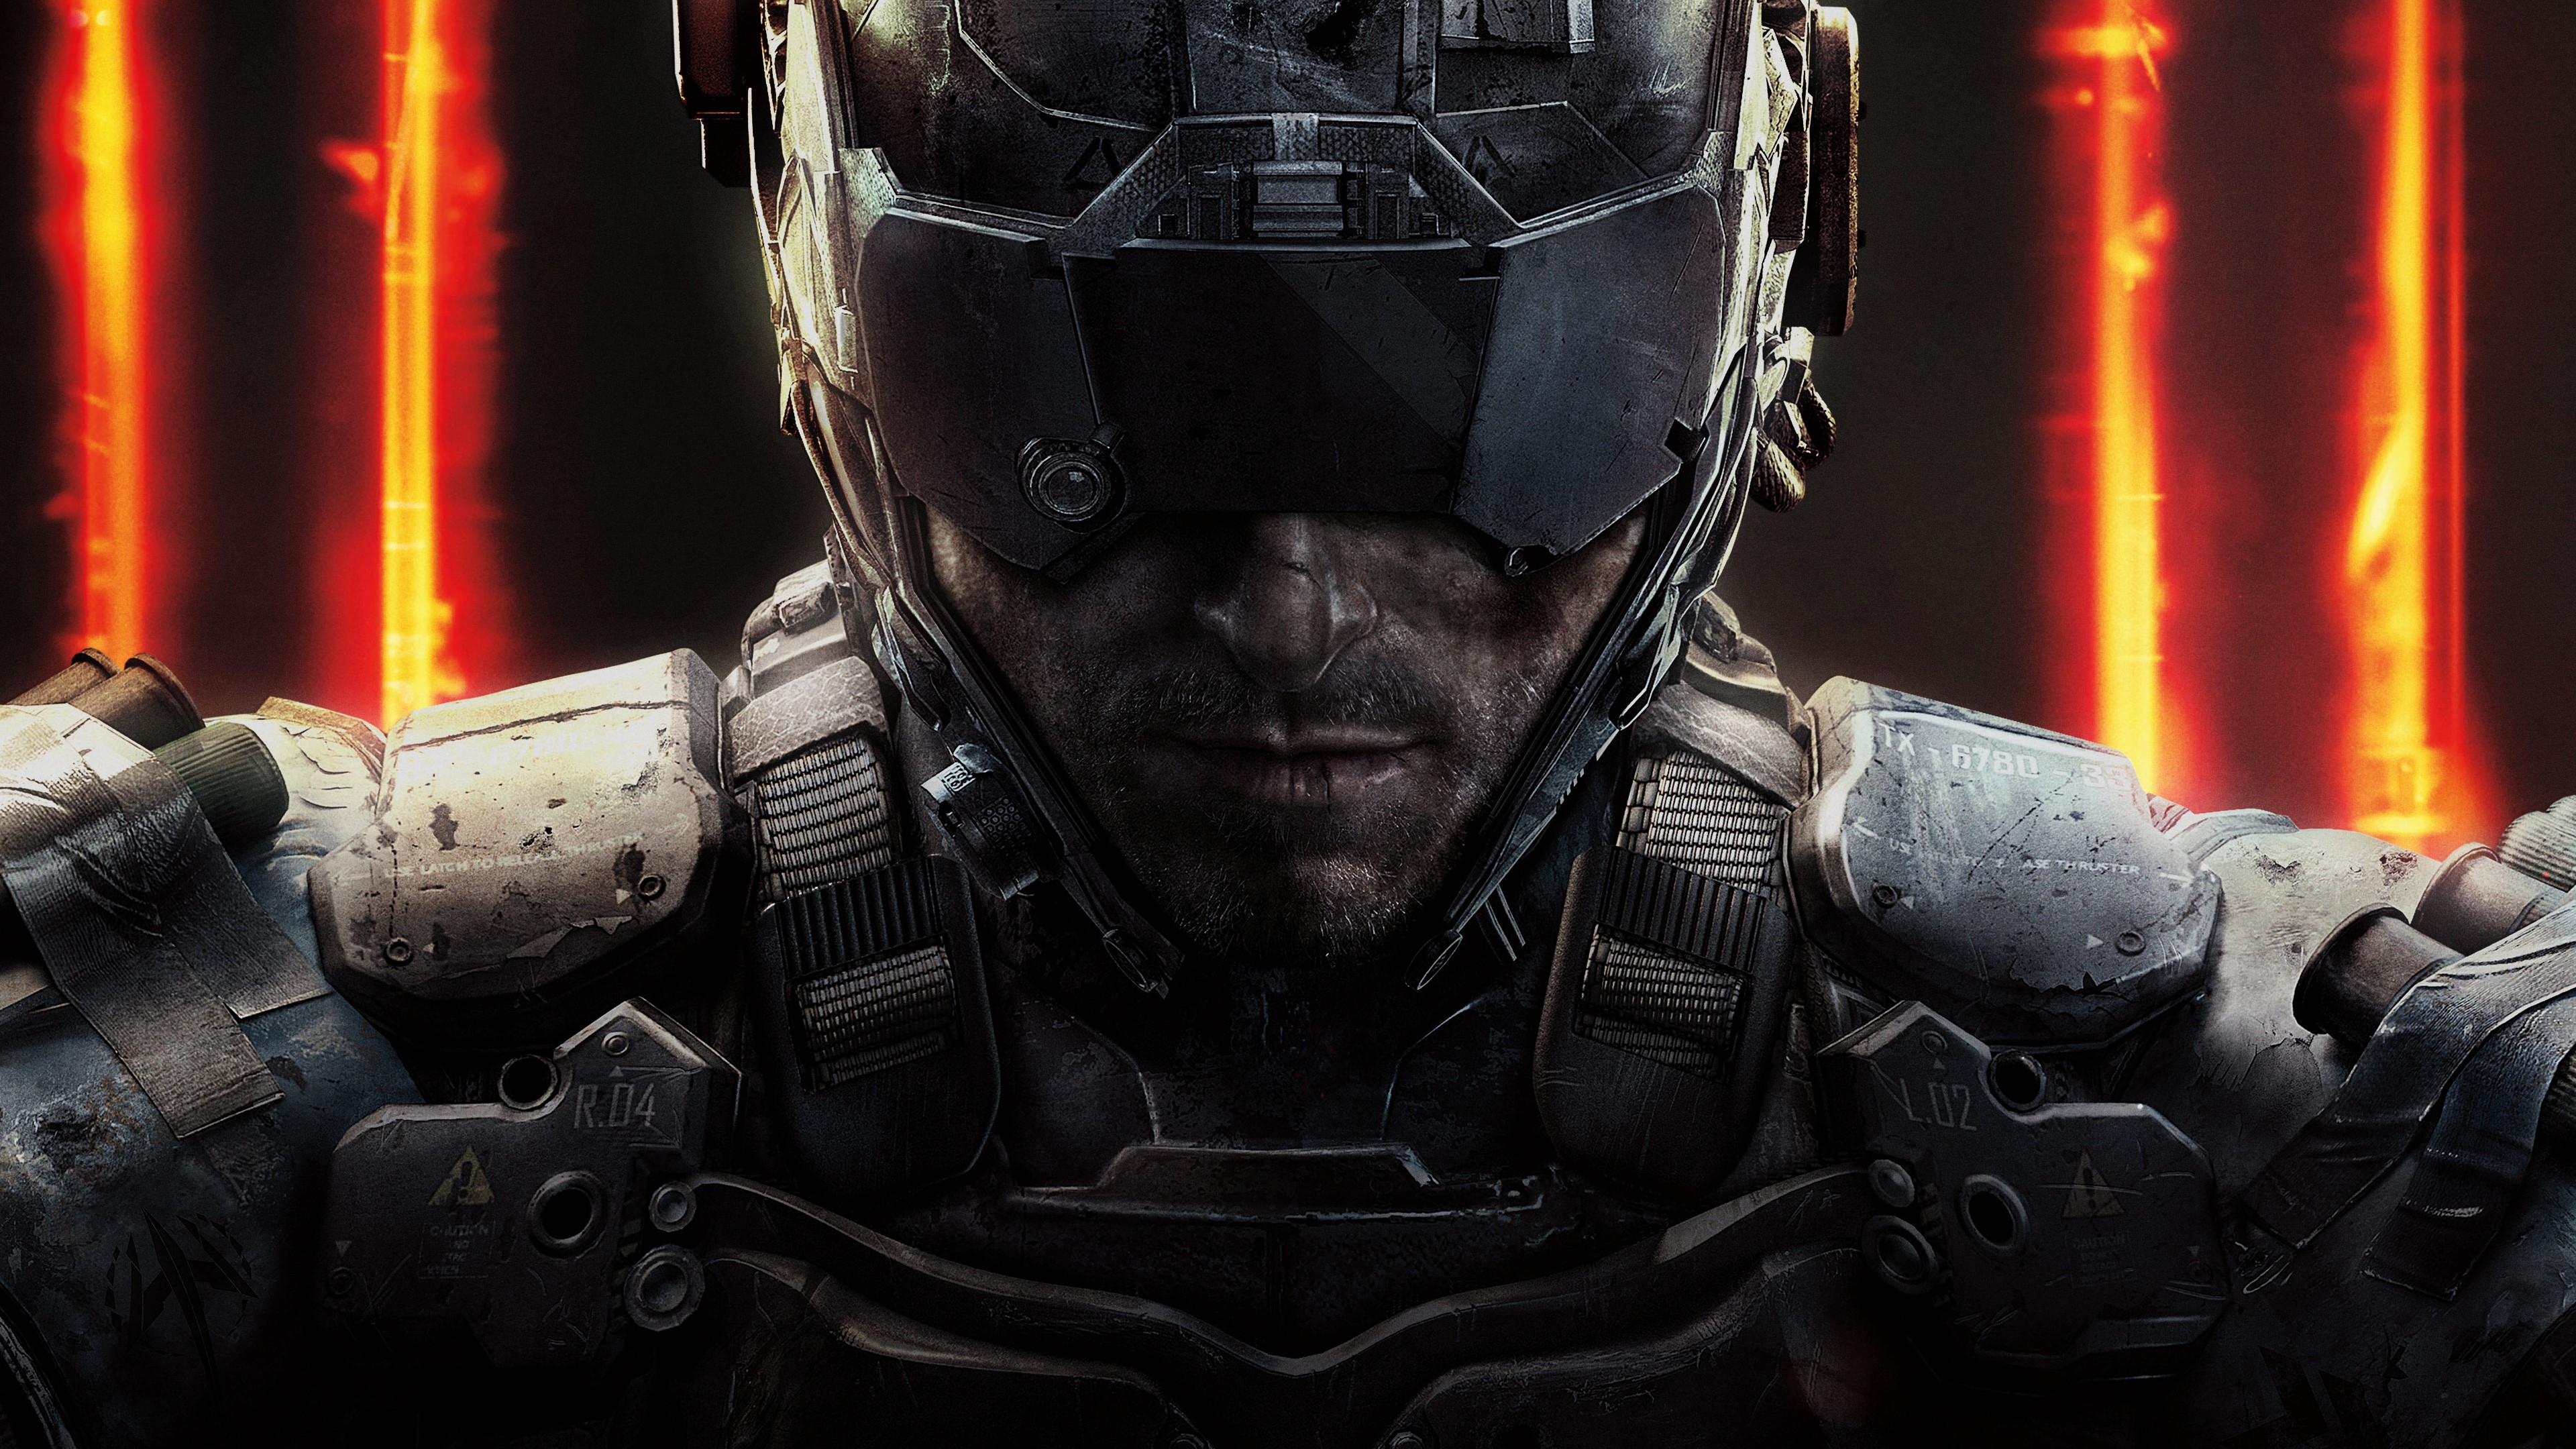 Call of Duty Black Ops 3 HD wallpapers free download